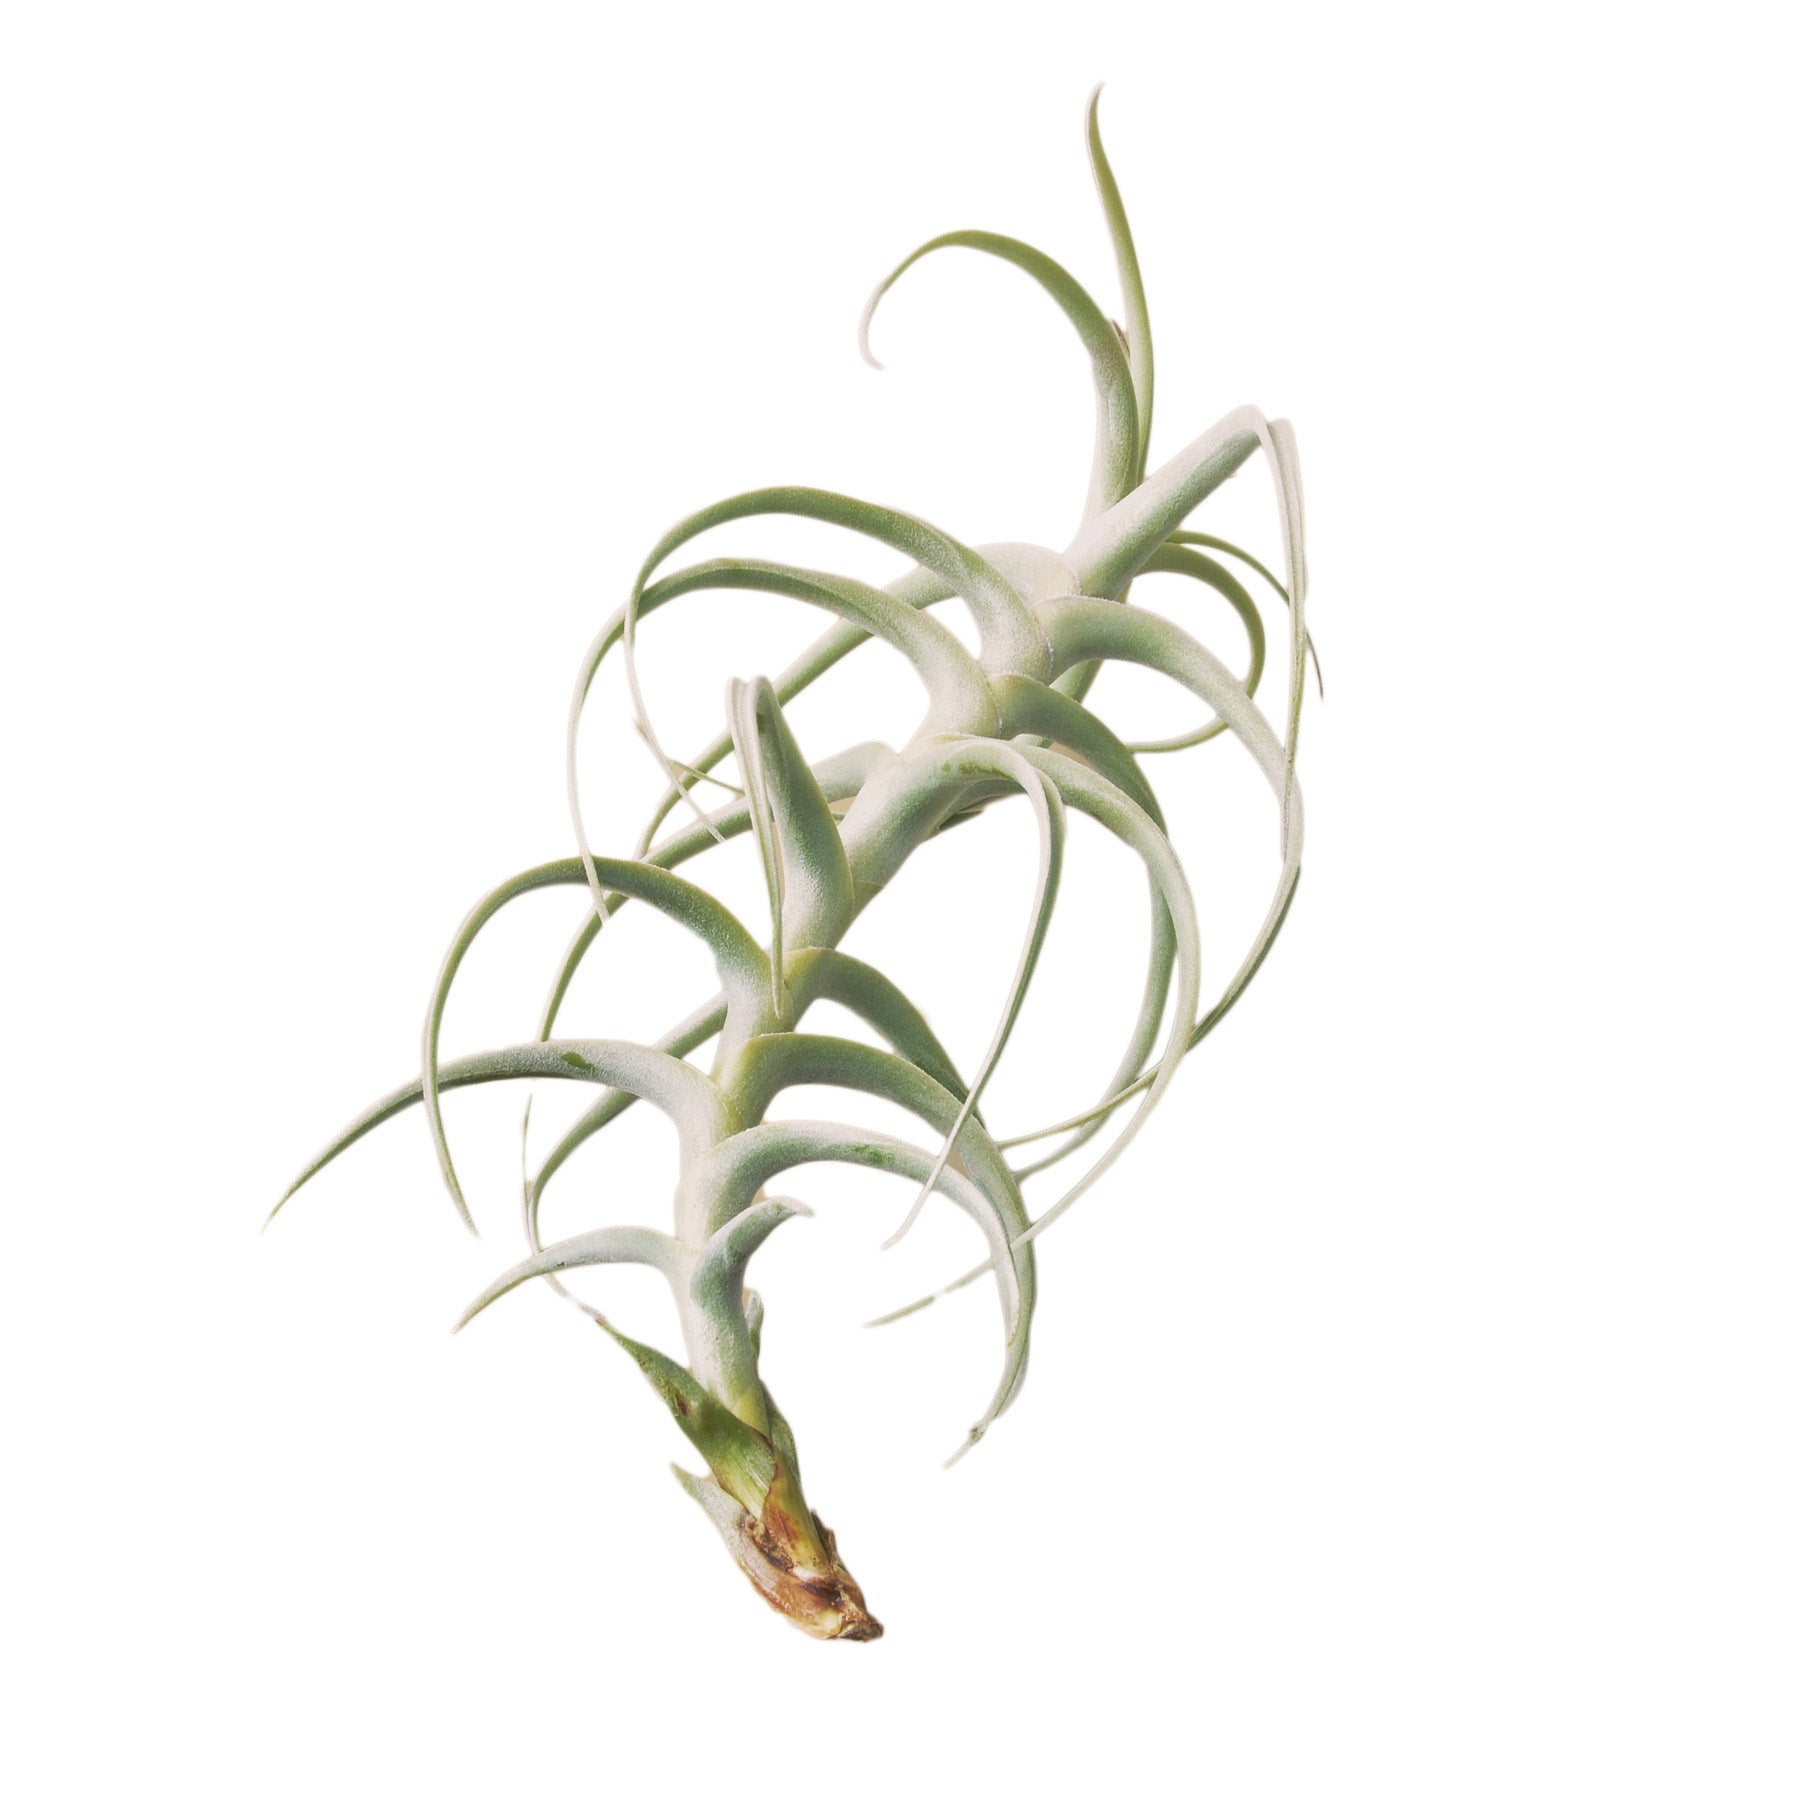 An air plant at a garden center on a white background.